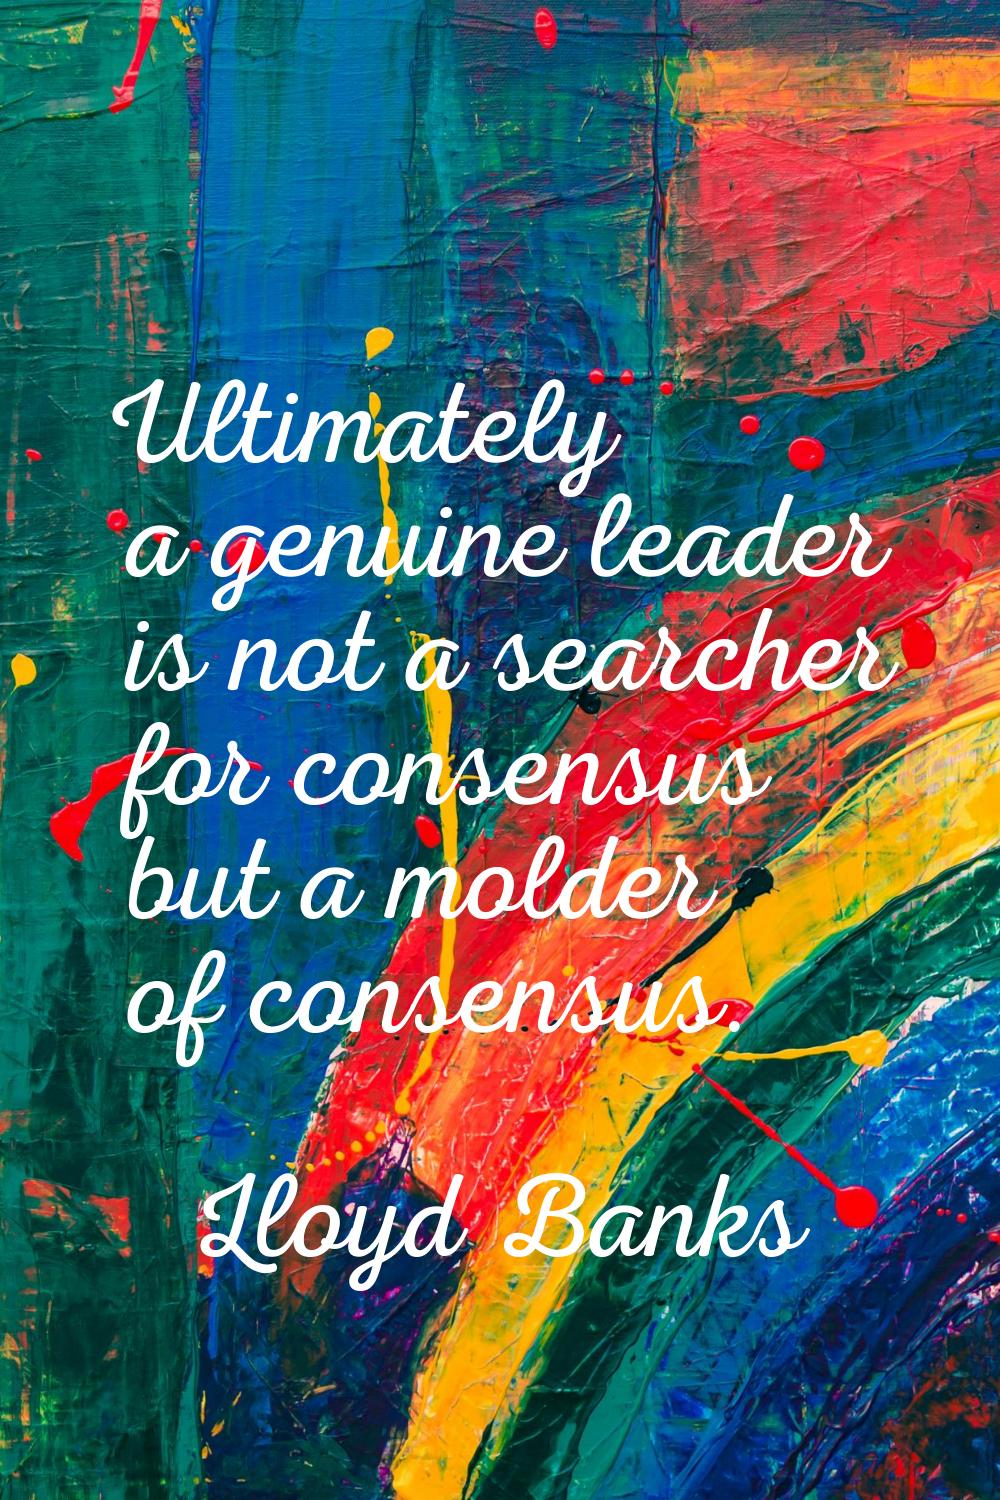 Ultimately a genuine leader is not a searcher for consensus but a molder of consensus.